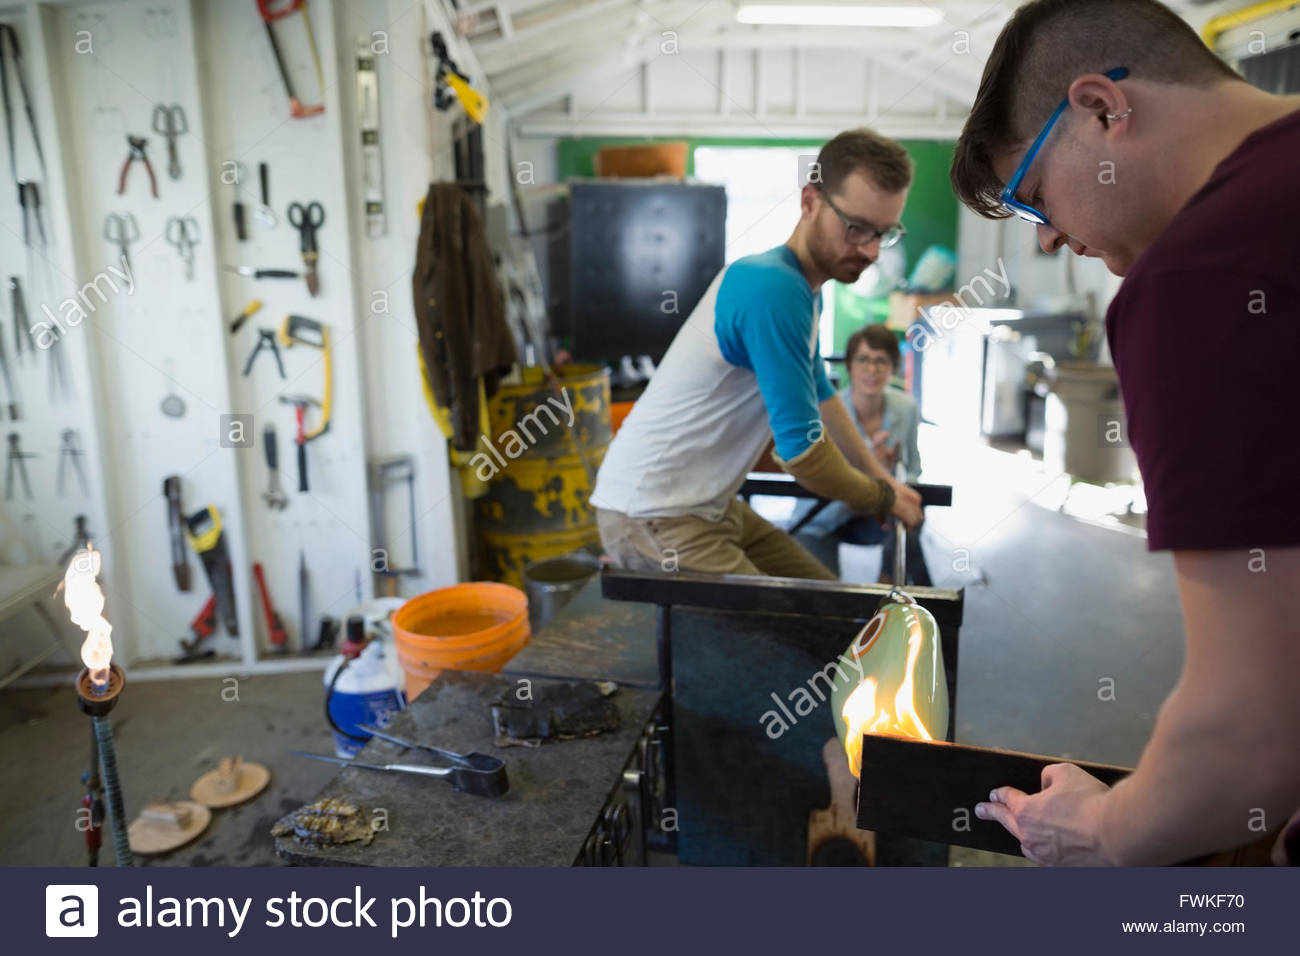 Glassblowers shaping molten glass in workshop Stock Photo